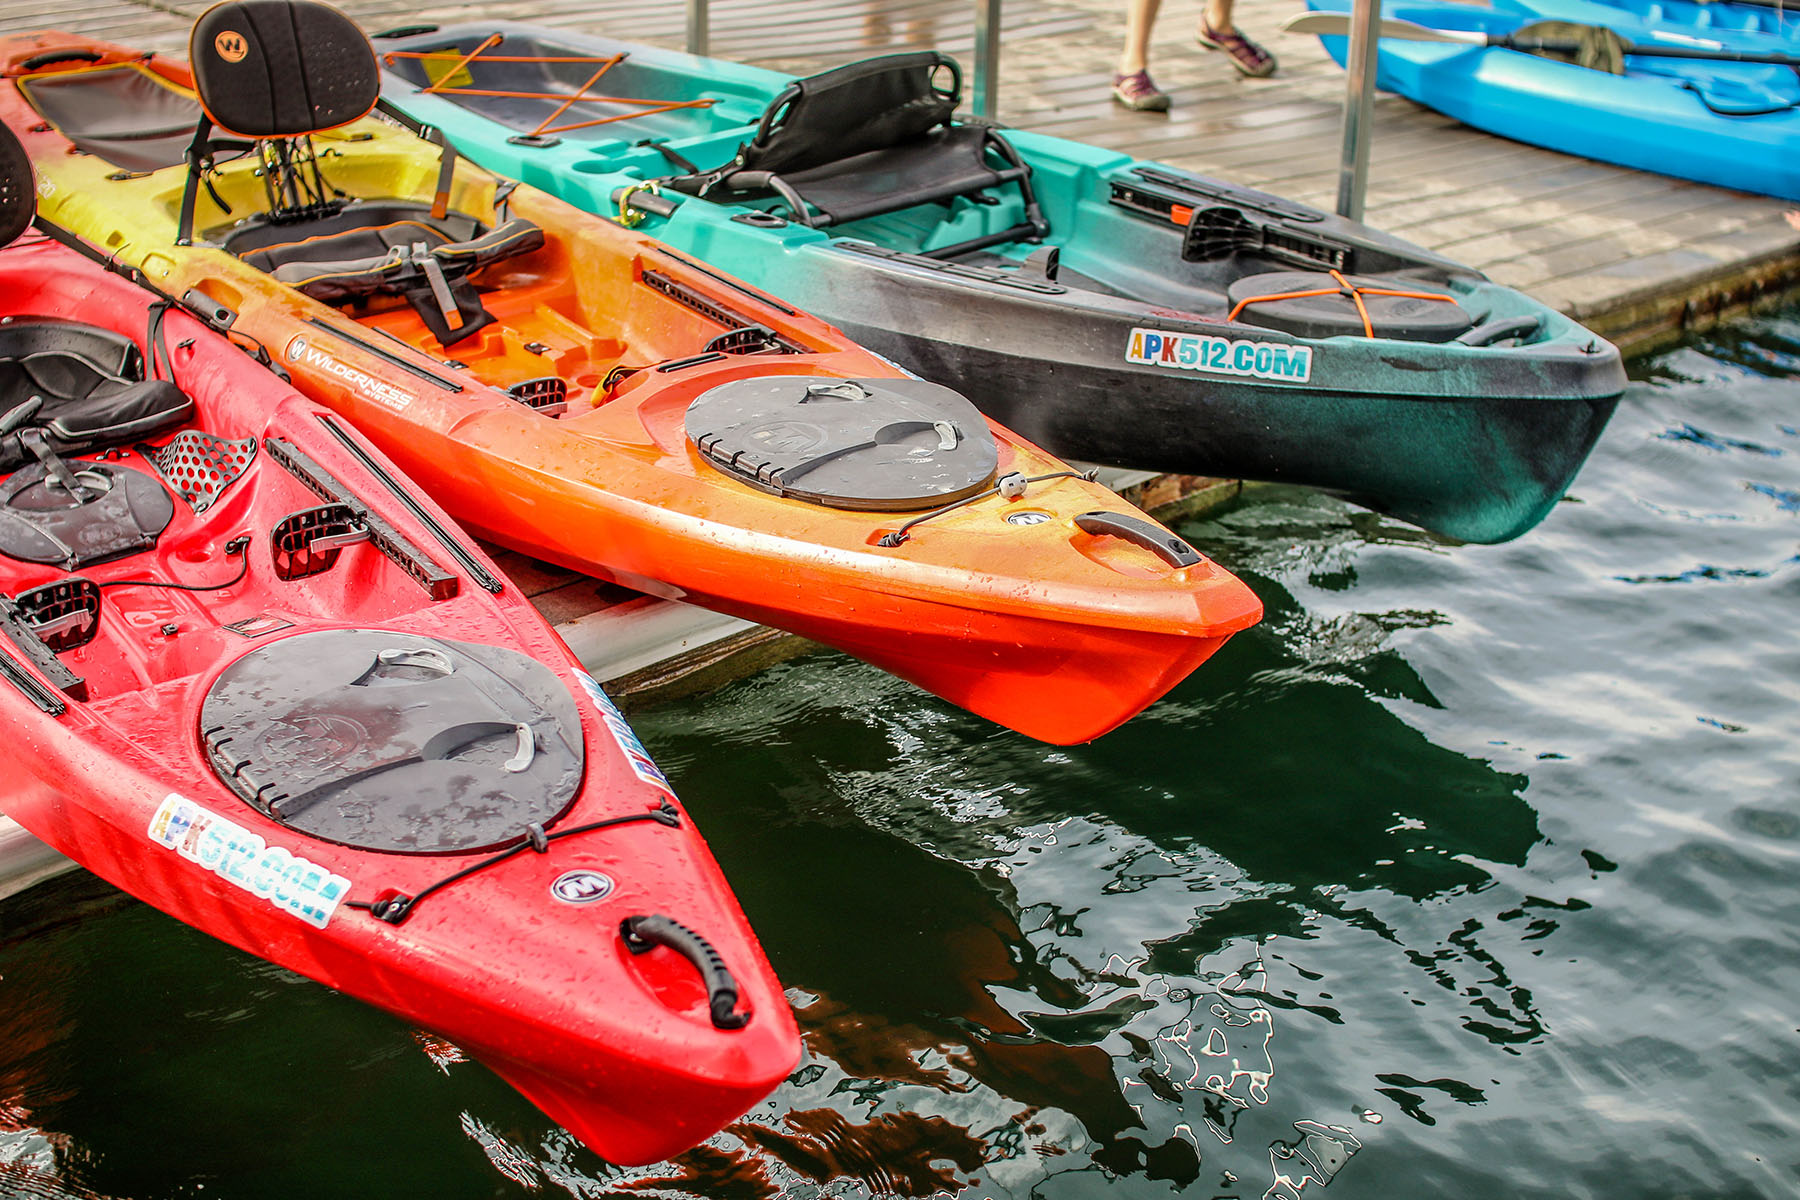 Austin Kayak - Limited Edition Coral Yeti Products are